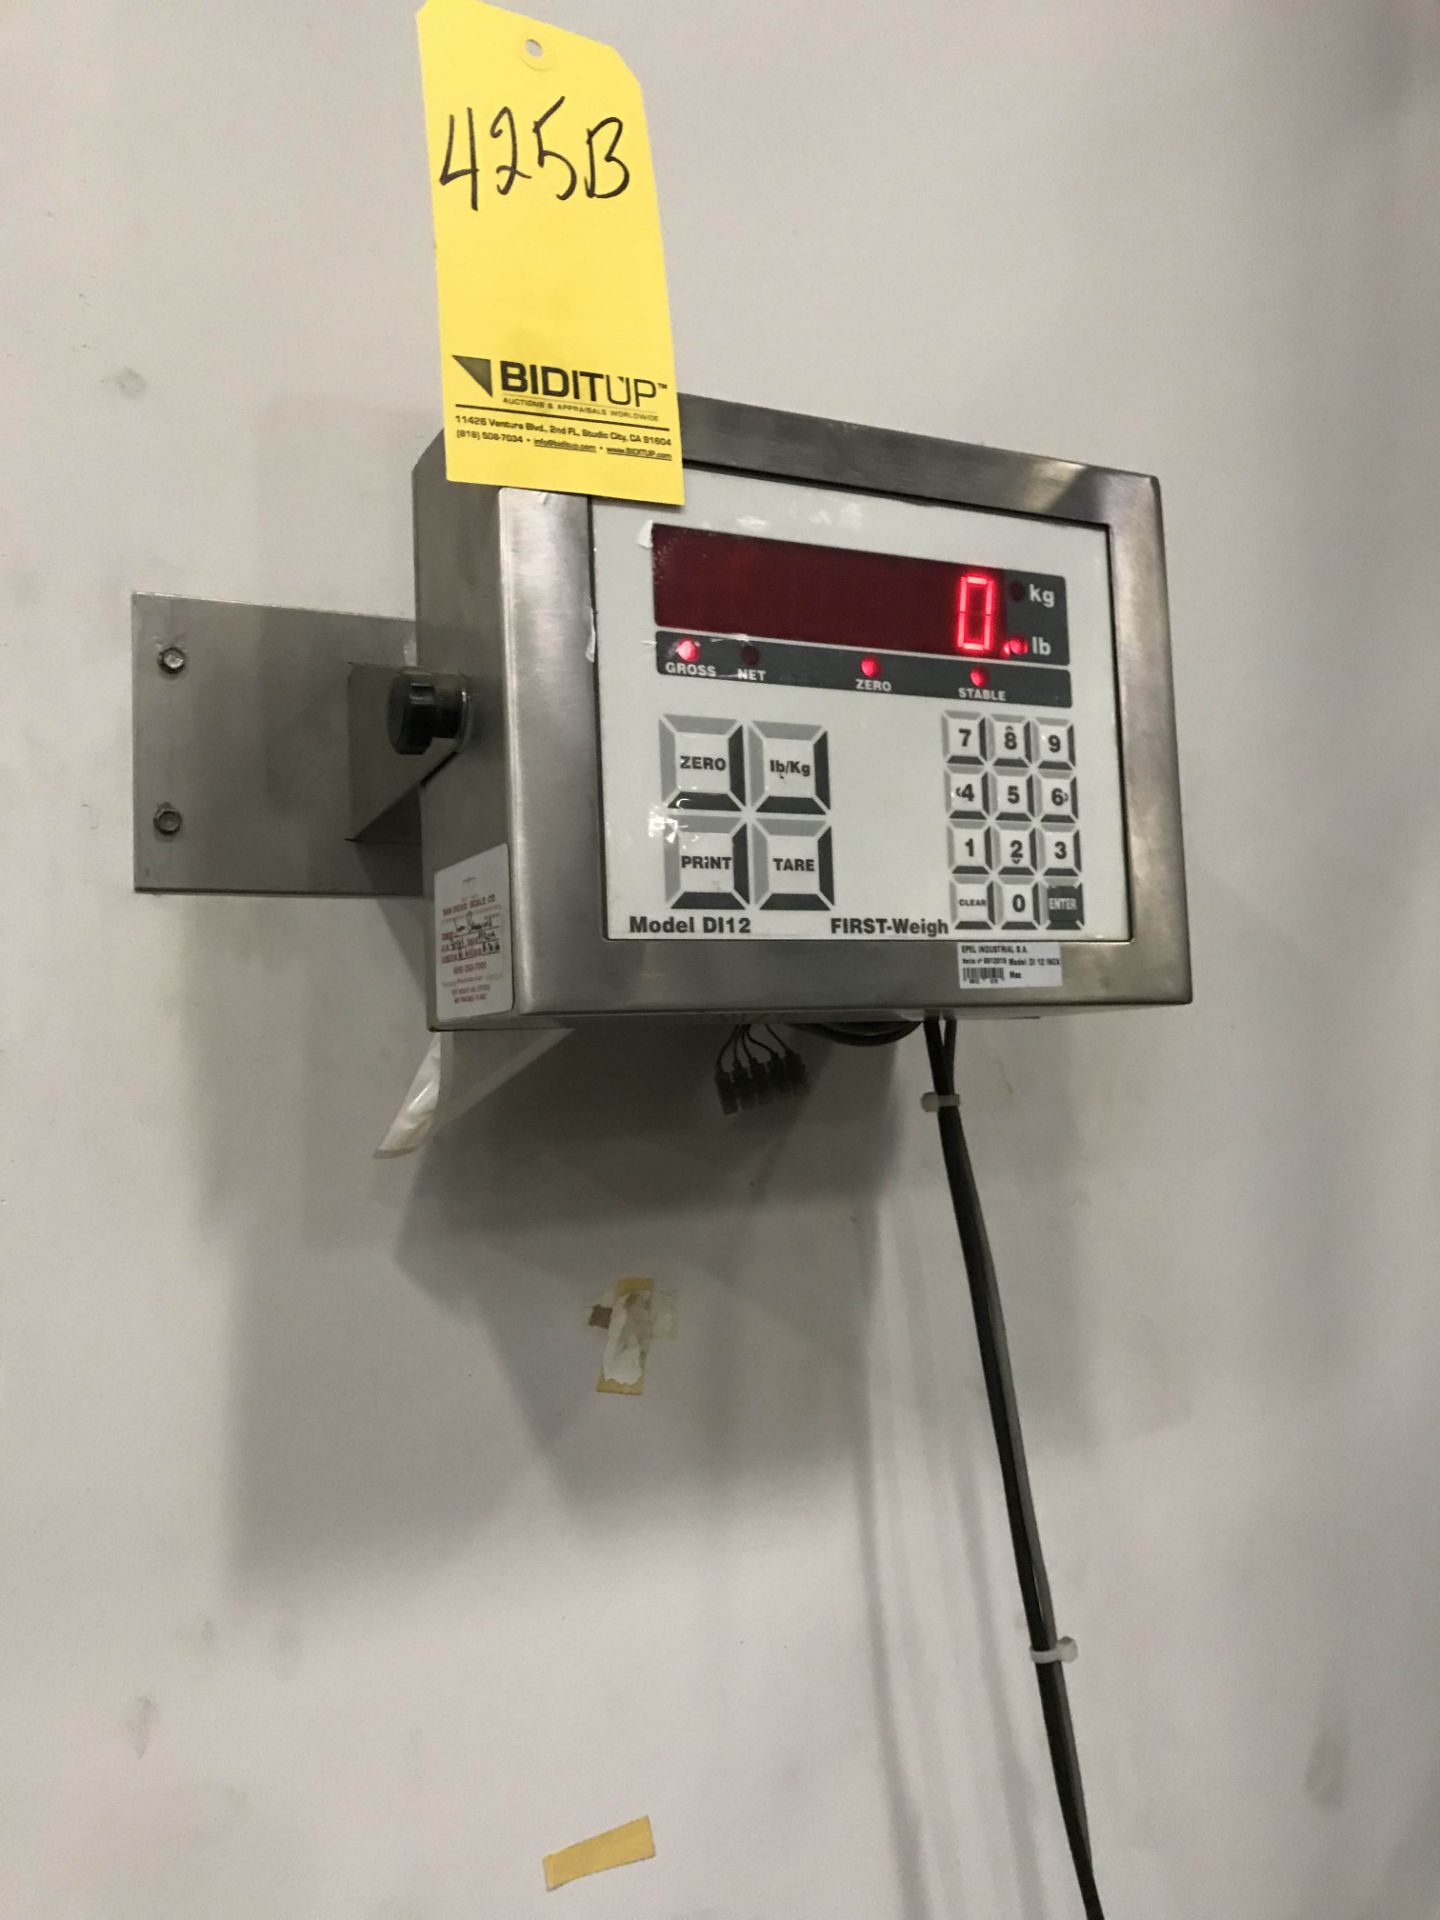 First Weigh Mdl: DI12 Floor Scale - Image 2 of 2